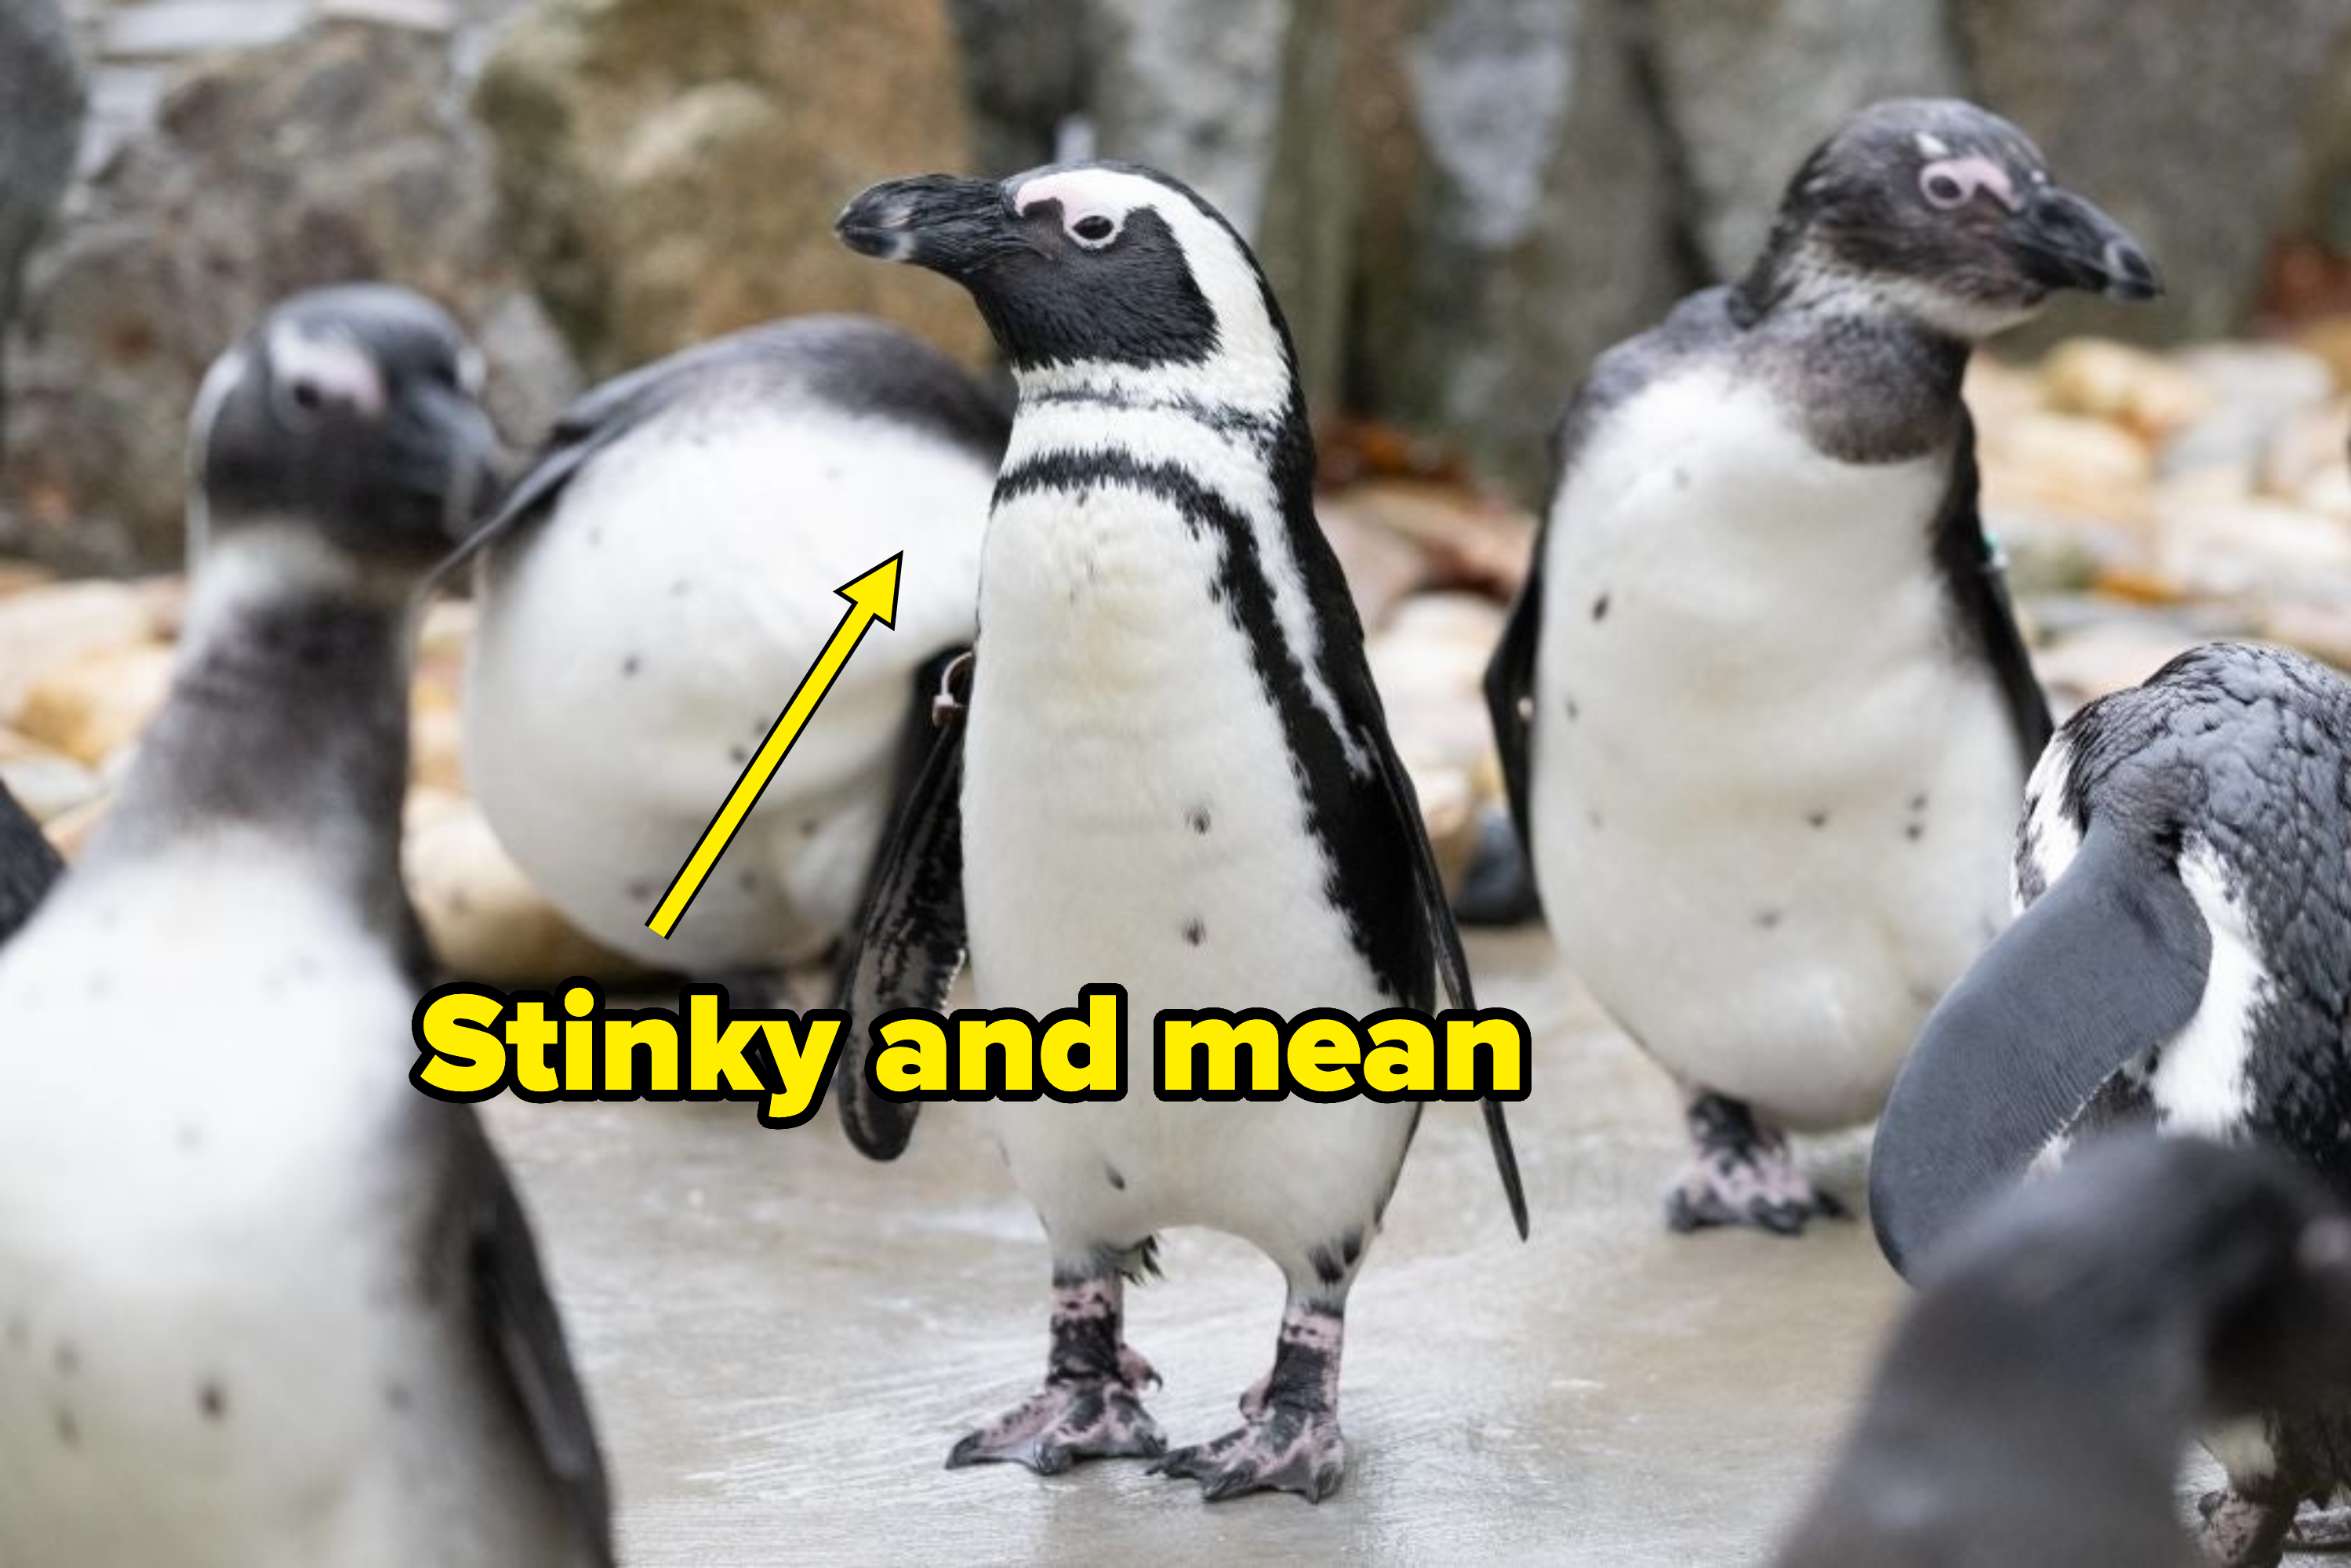 Penguin standing with peers, one looking up, in a rocky enclosure captioned &quot;stinky and mean&quot;